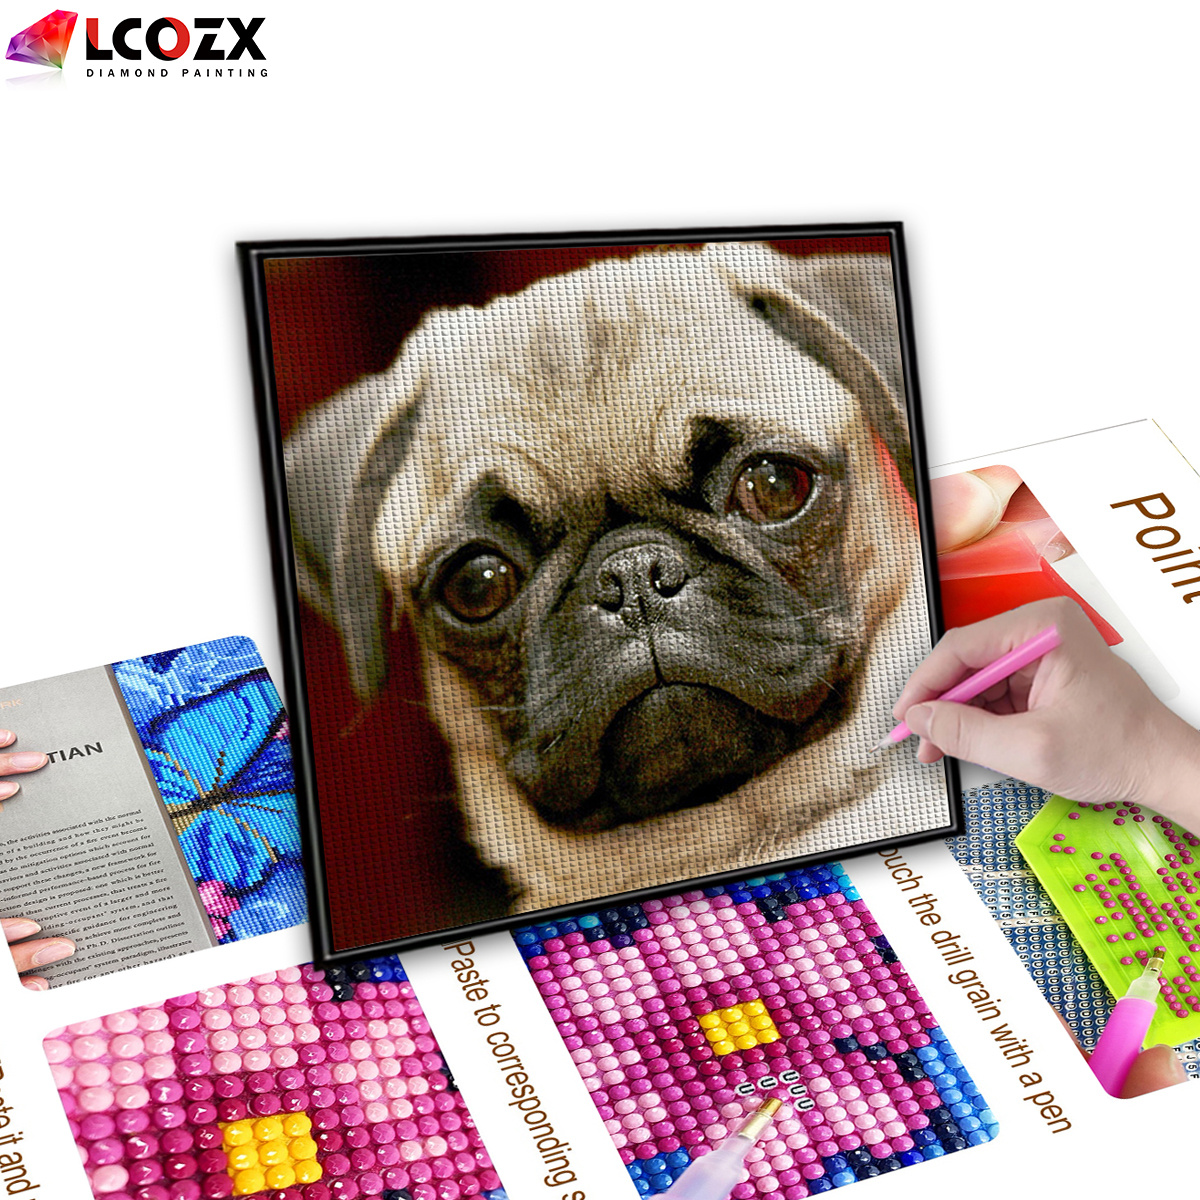 Puppy Puzzle, Gift for Dog Lovers